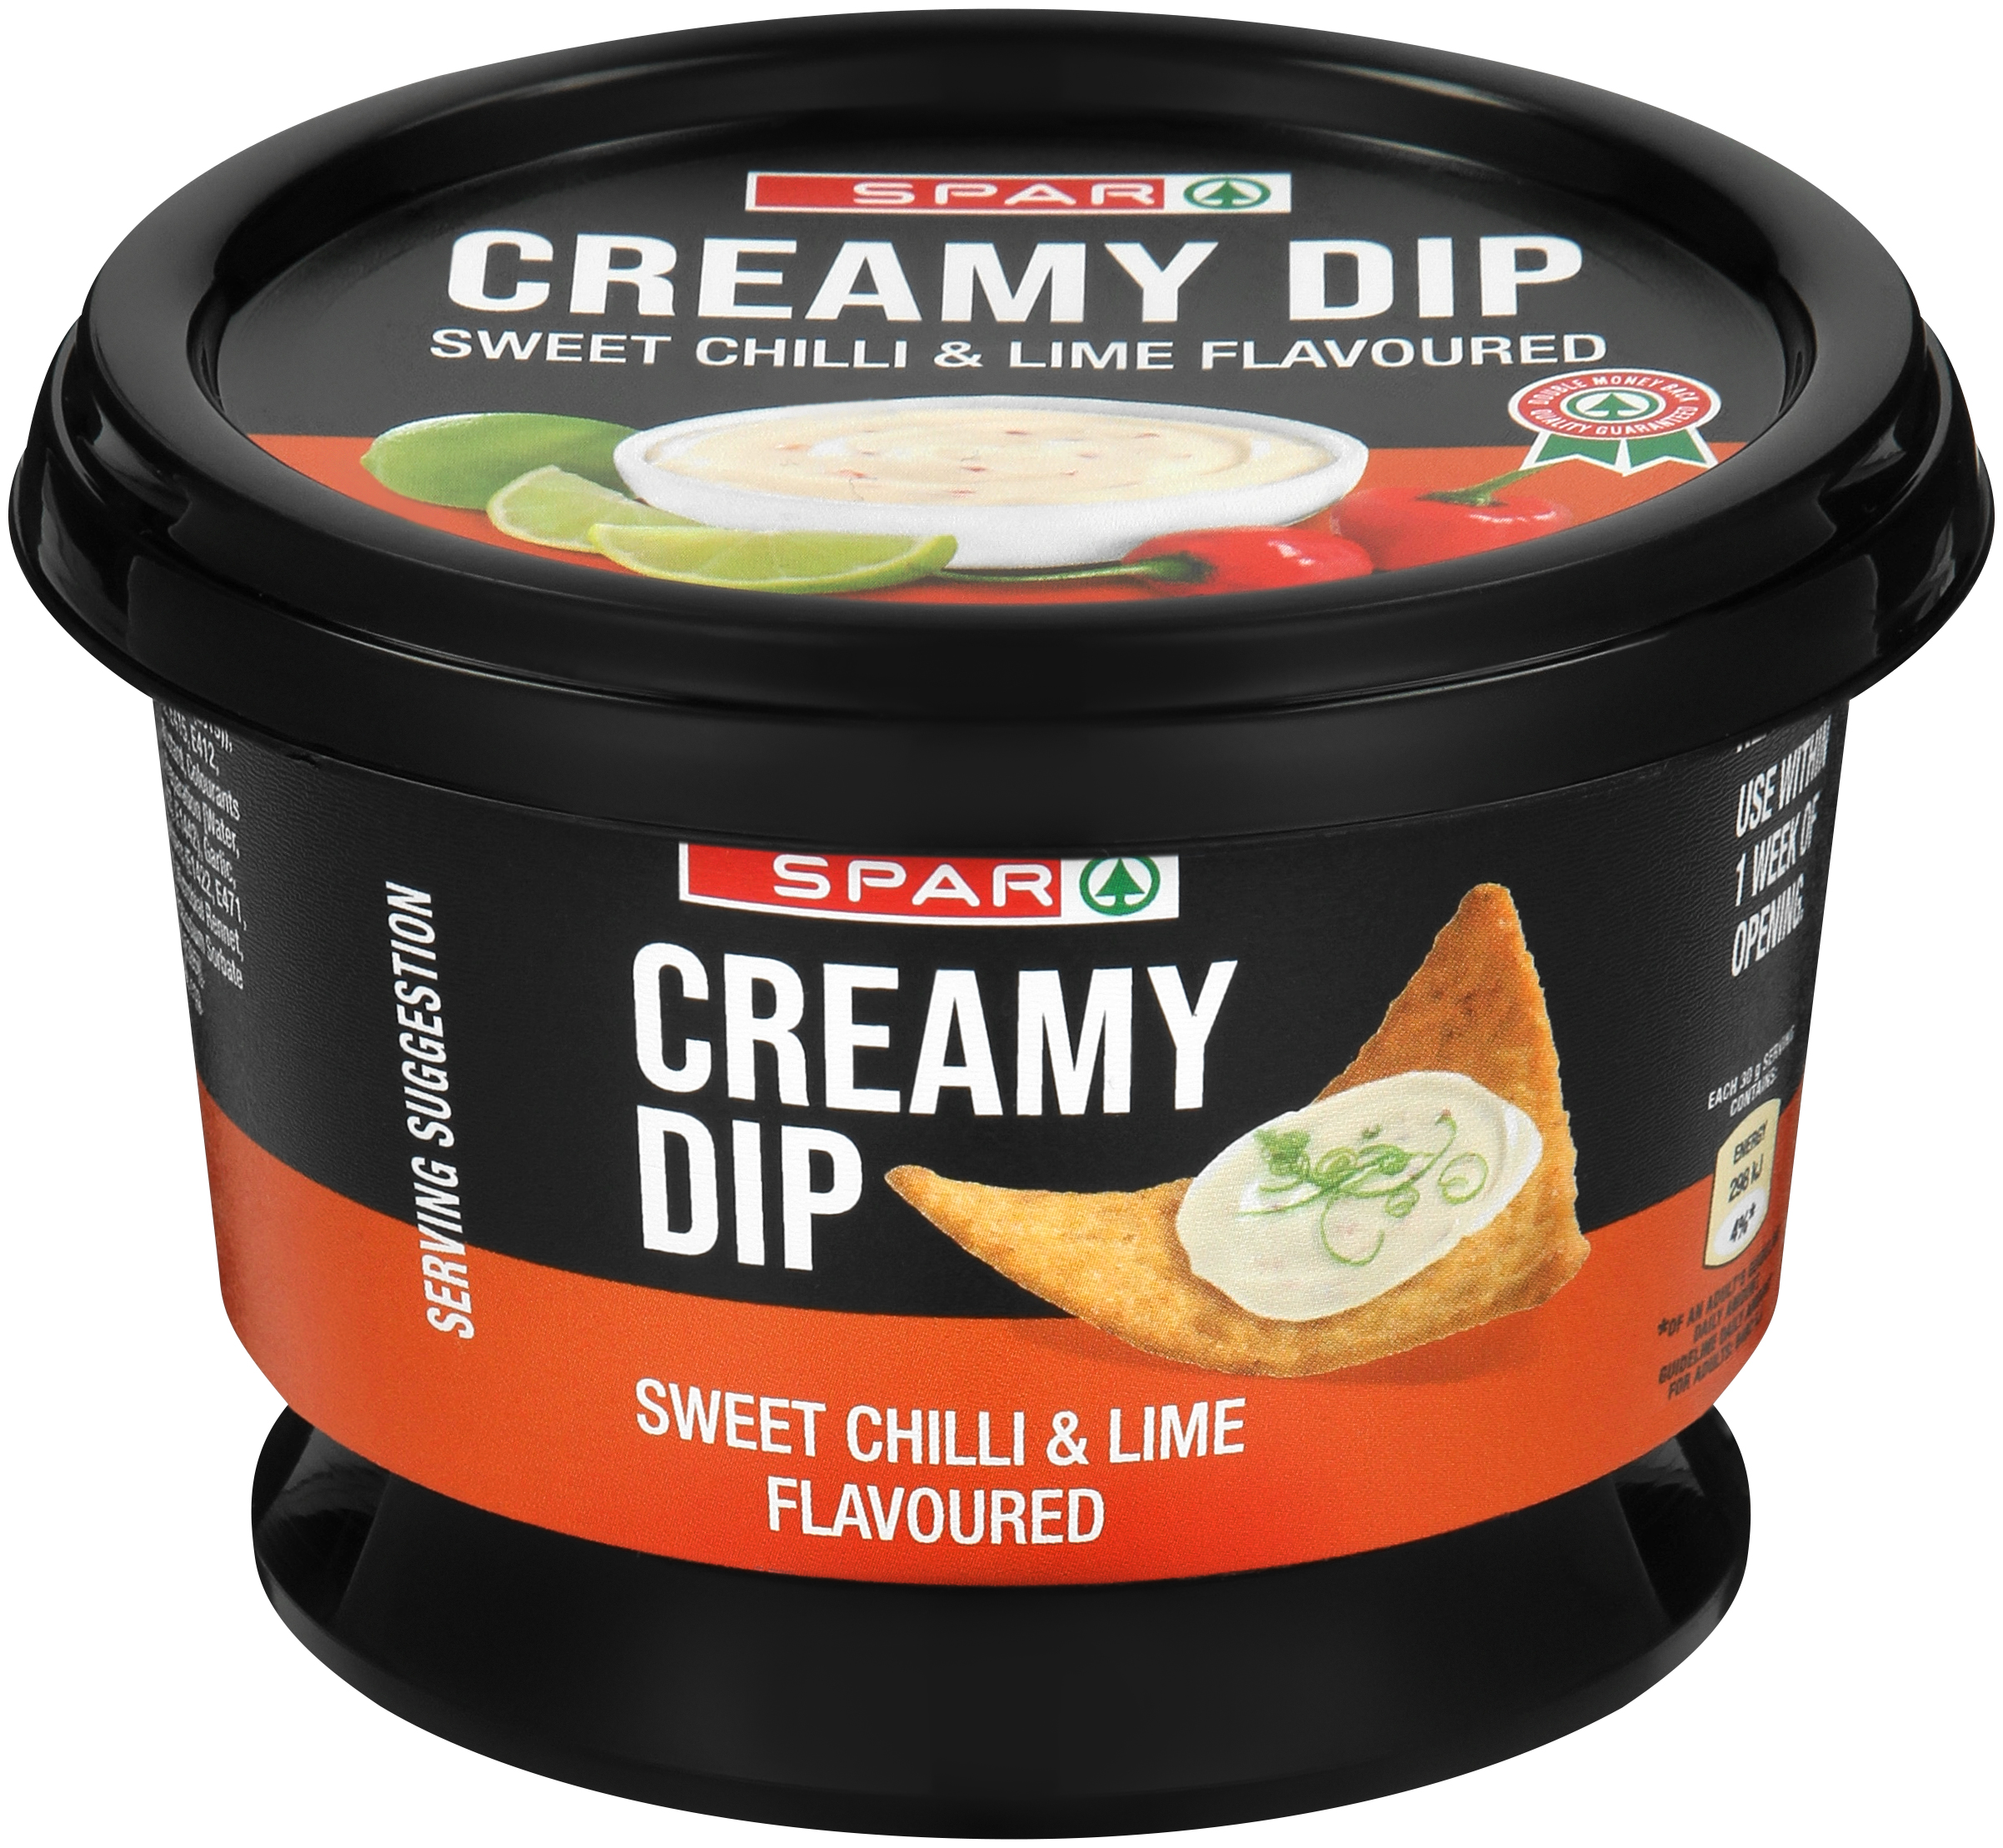 dip - sweet chilli & lime flavoured